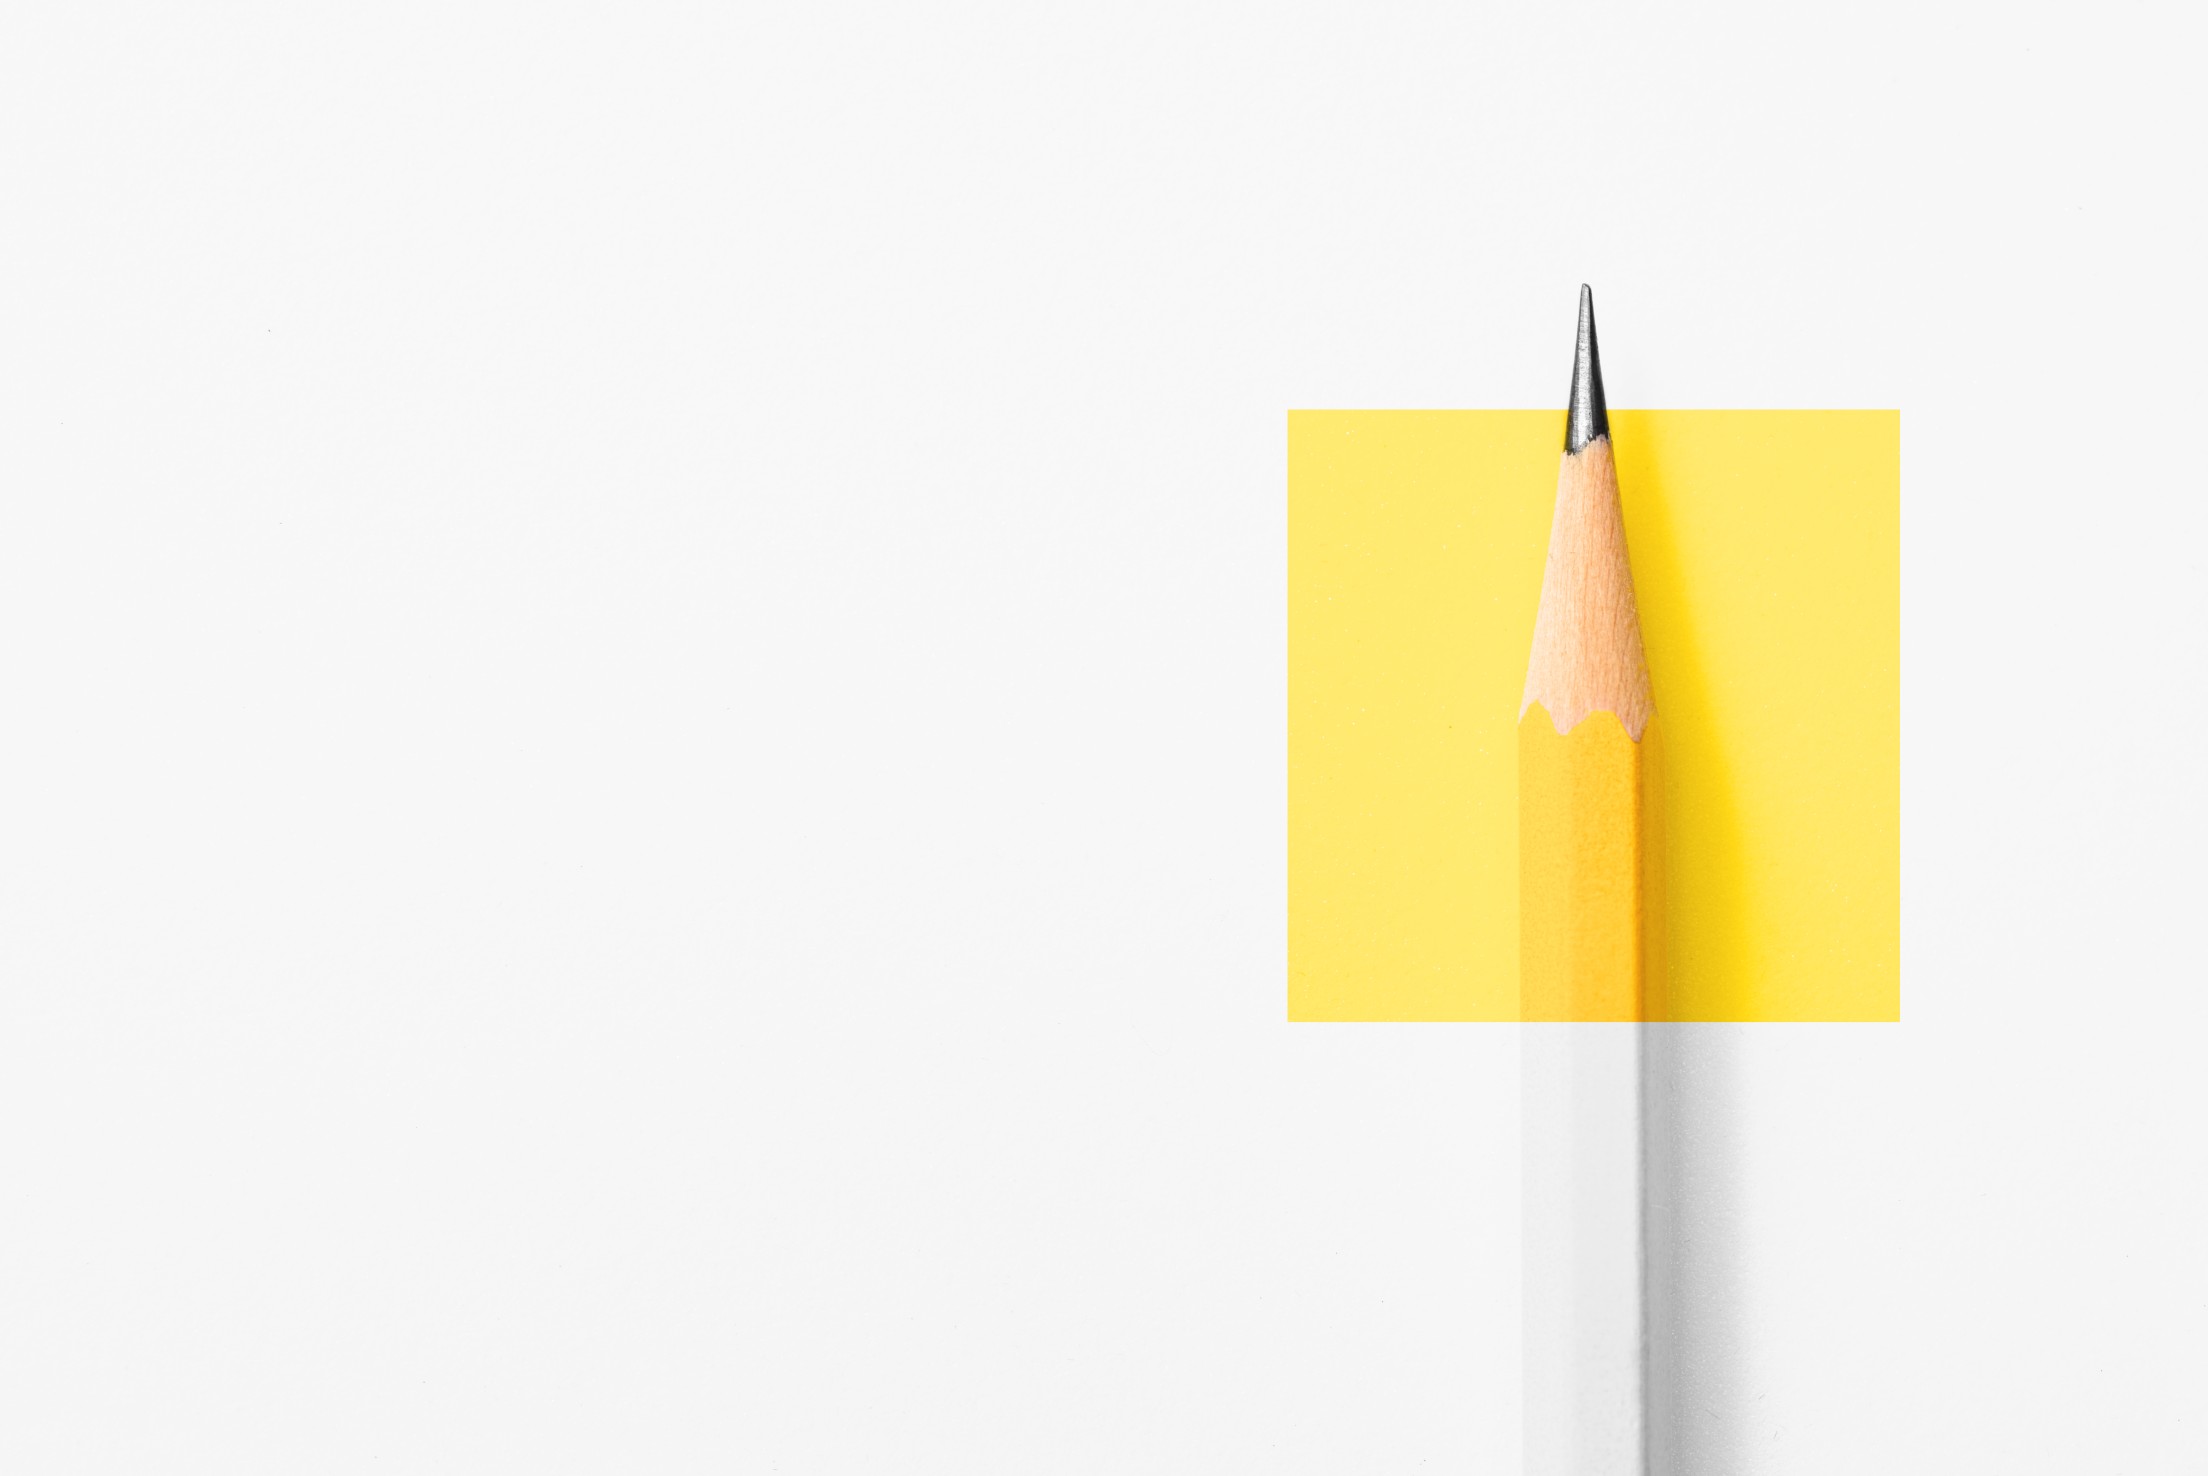 Minimalist design with white background with pencil on yellow square